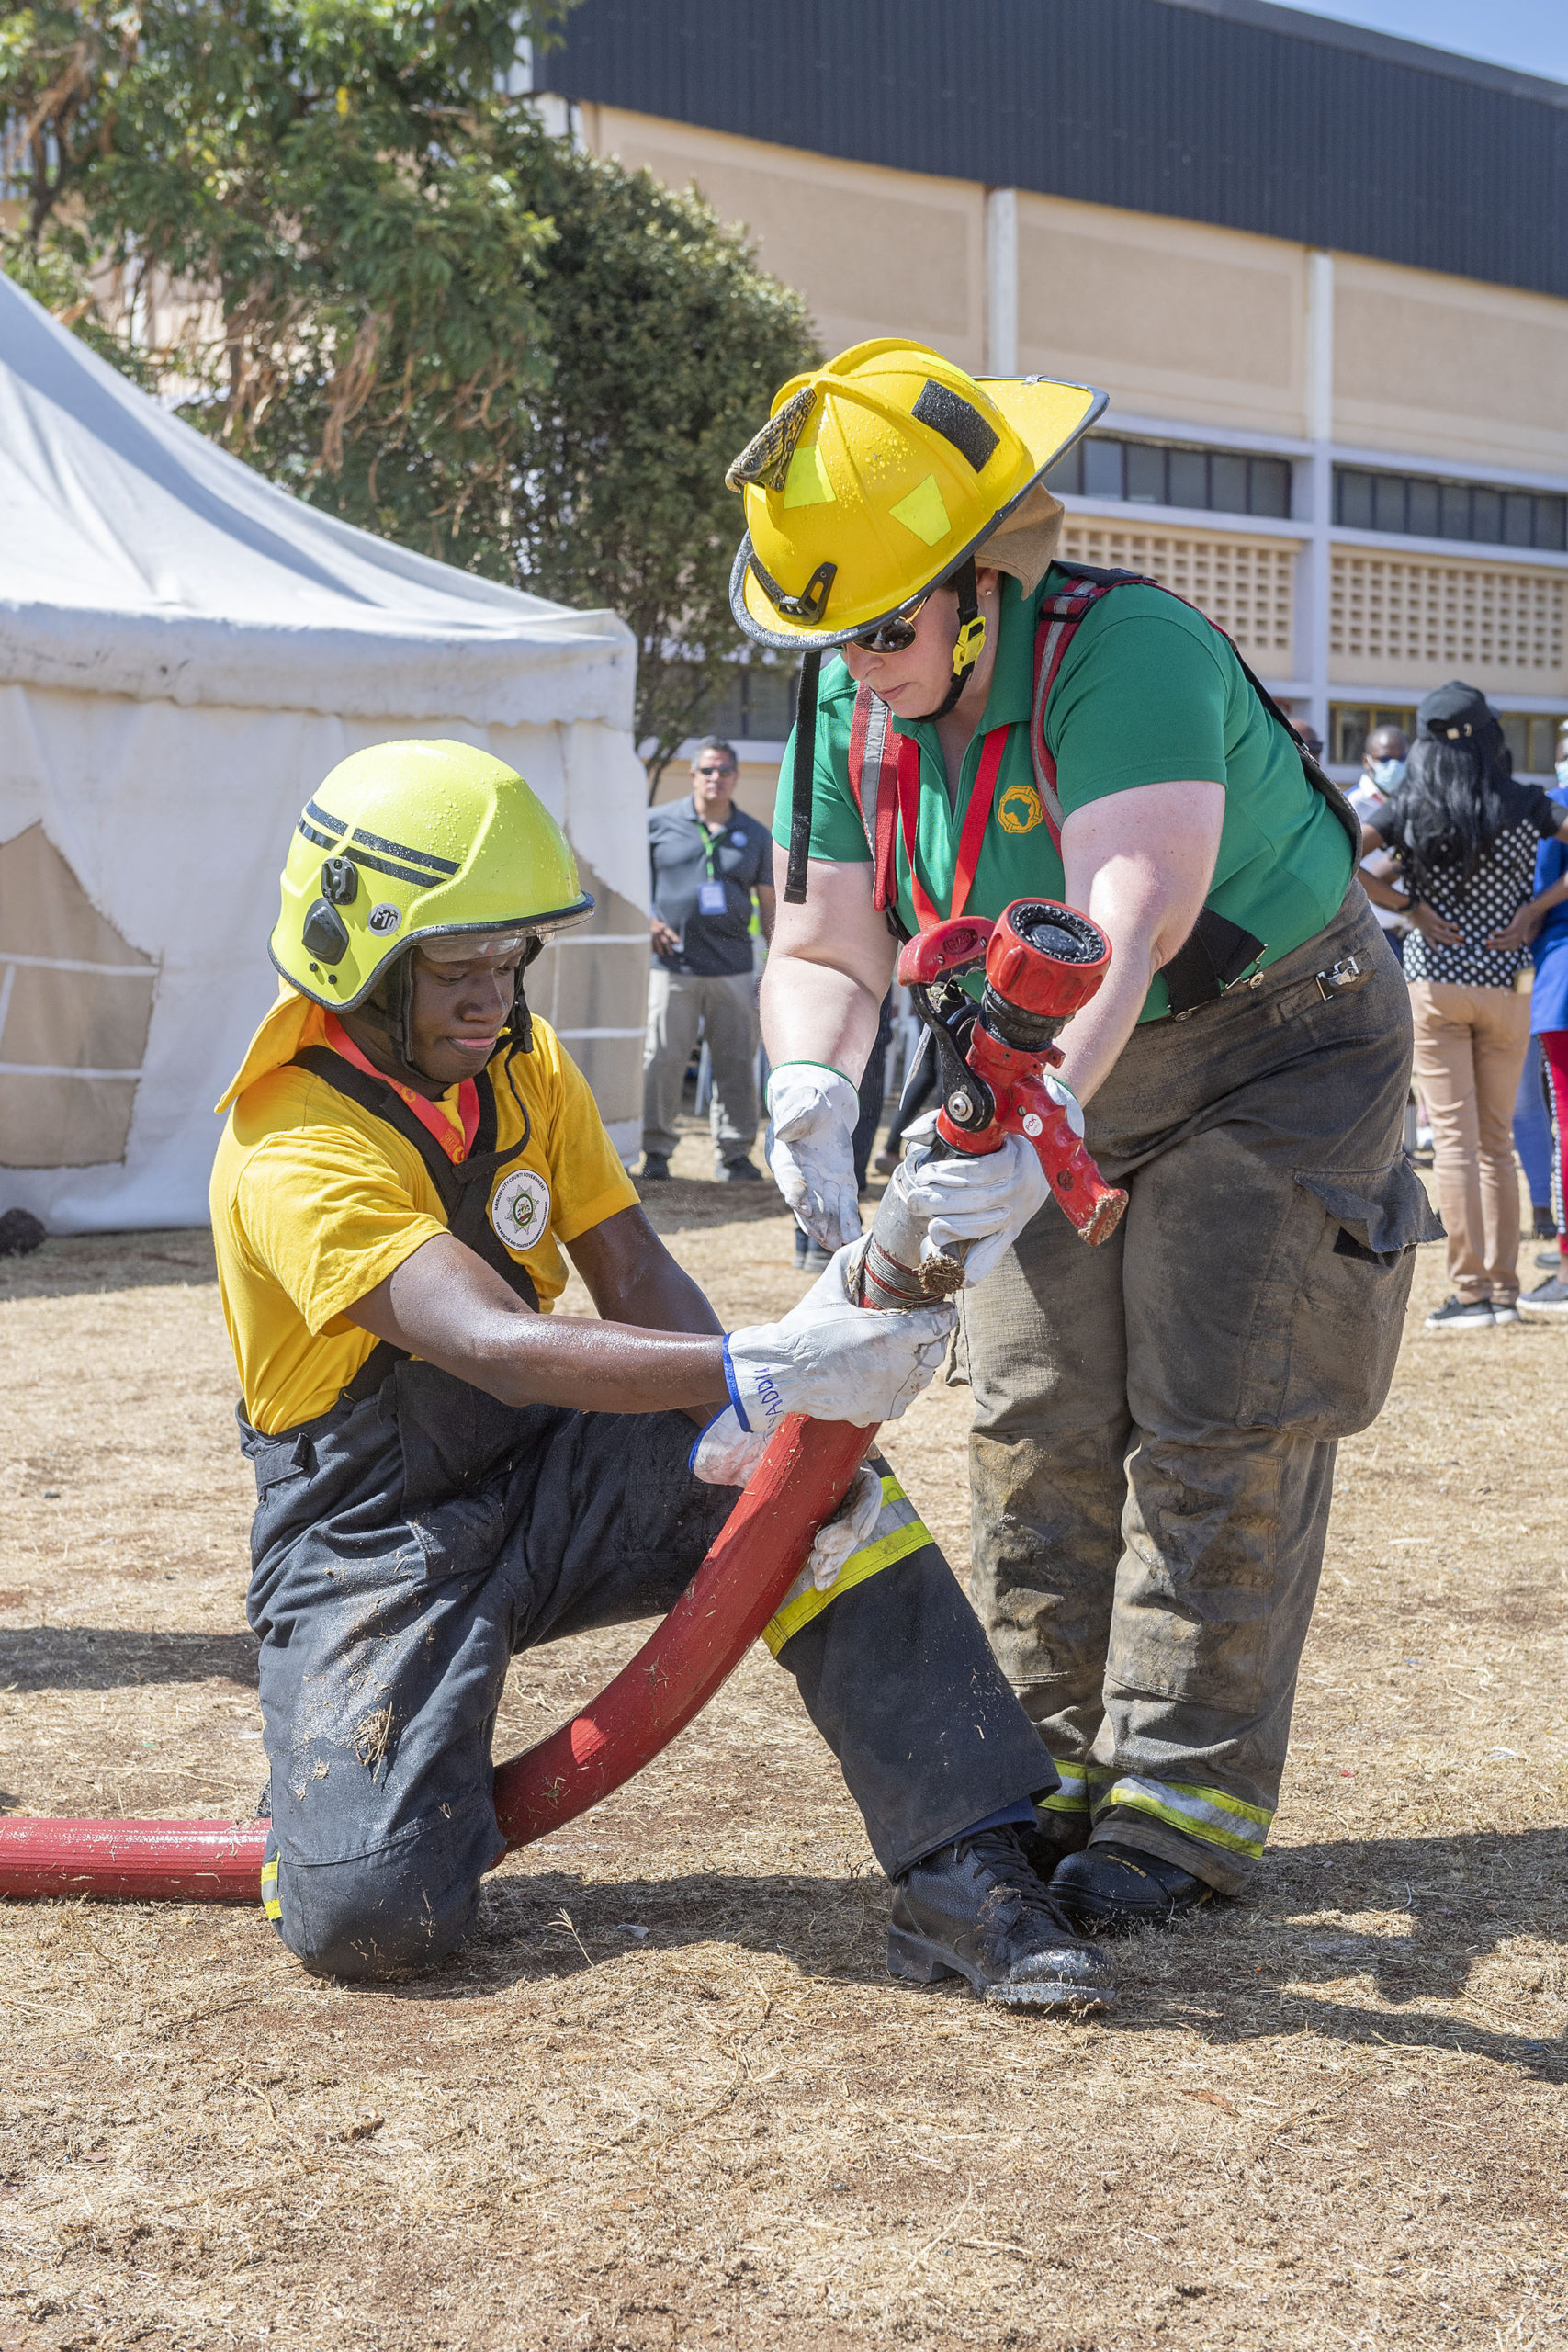 Texas firefighter and EMT Jennifer Bardwell gives advice on hose-handling techniques to a Kenyan firefighter during the Africa Fire Mission trip to Nairobi, Kenya.